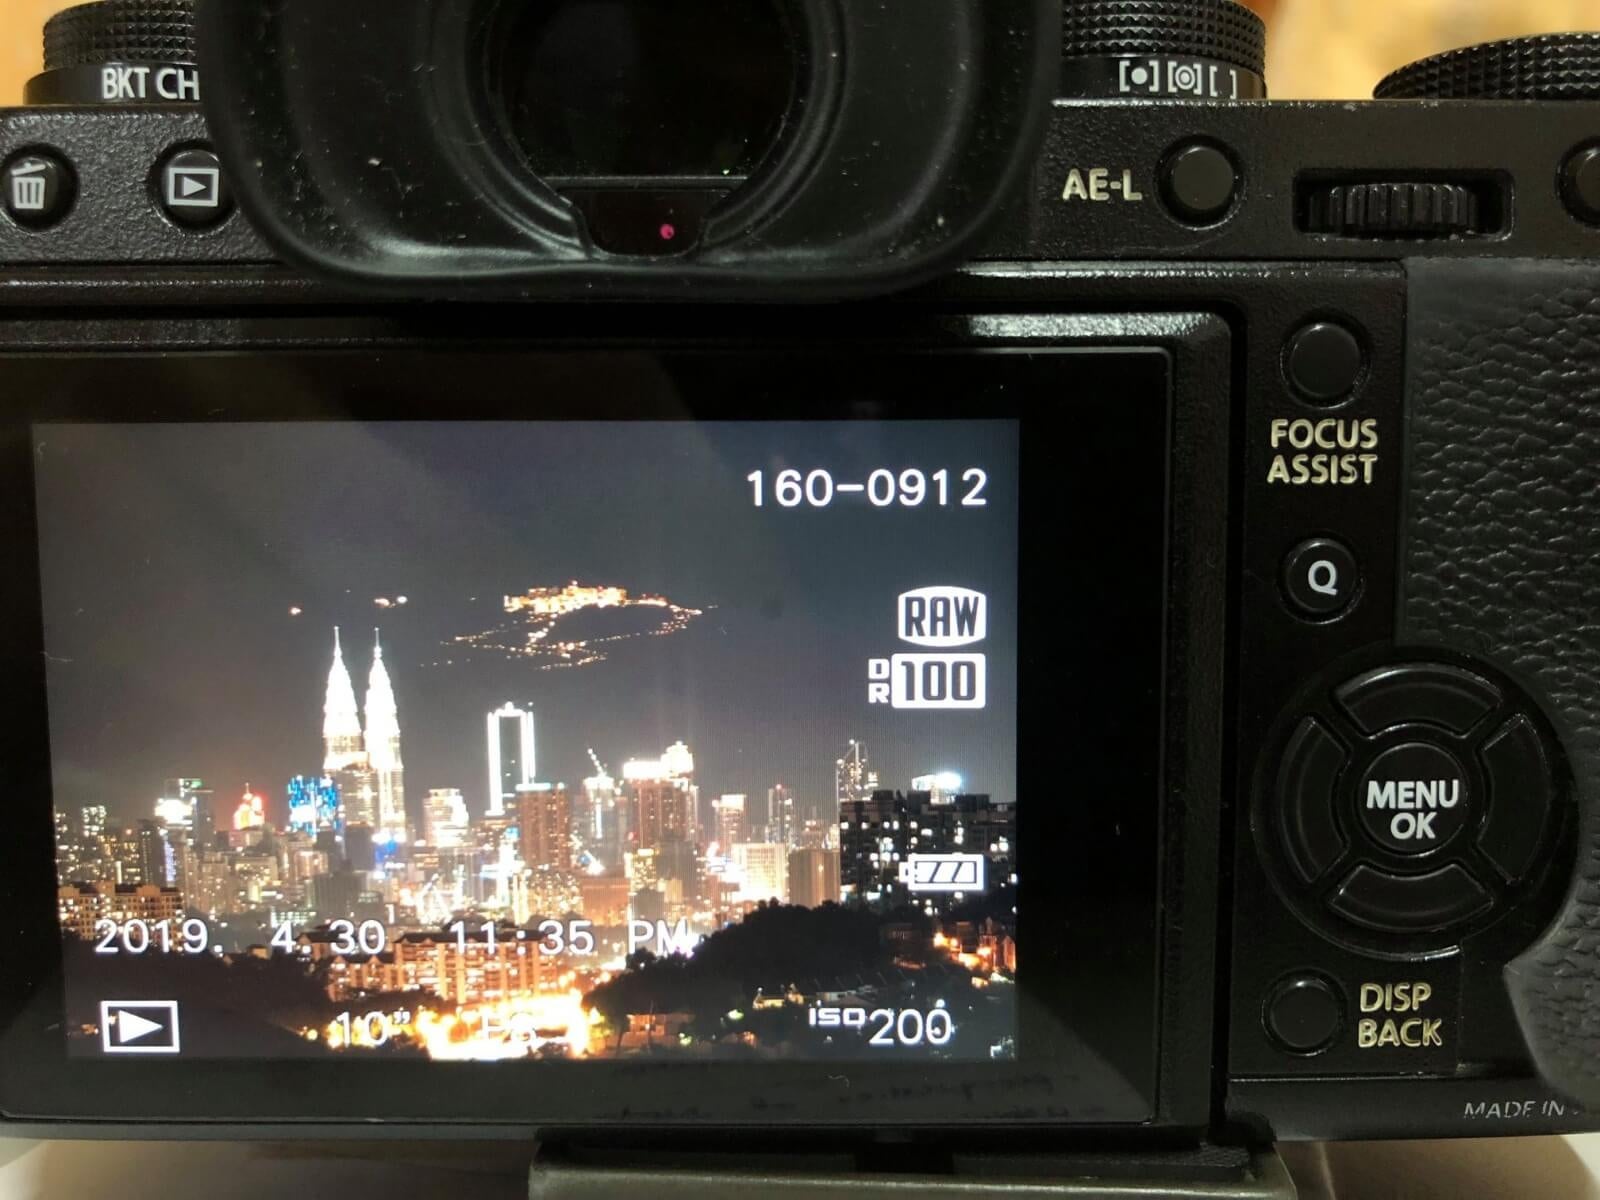 This Viral Photo Of Kl &Amp; Genting May Look Fake, But It's 100% Real! - World Of Buzz